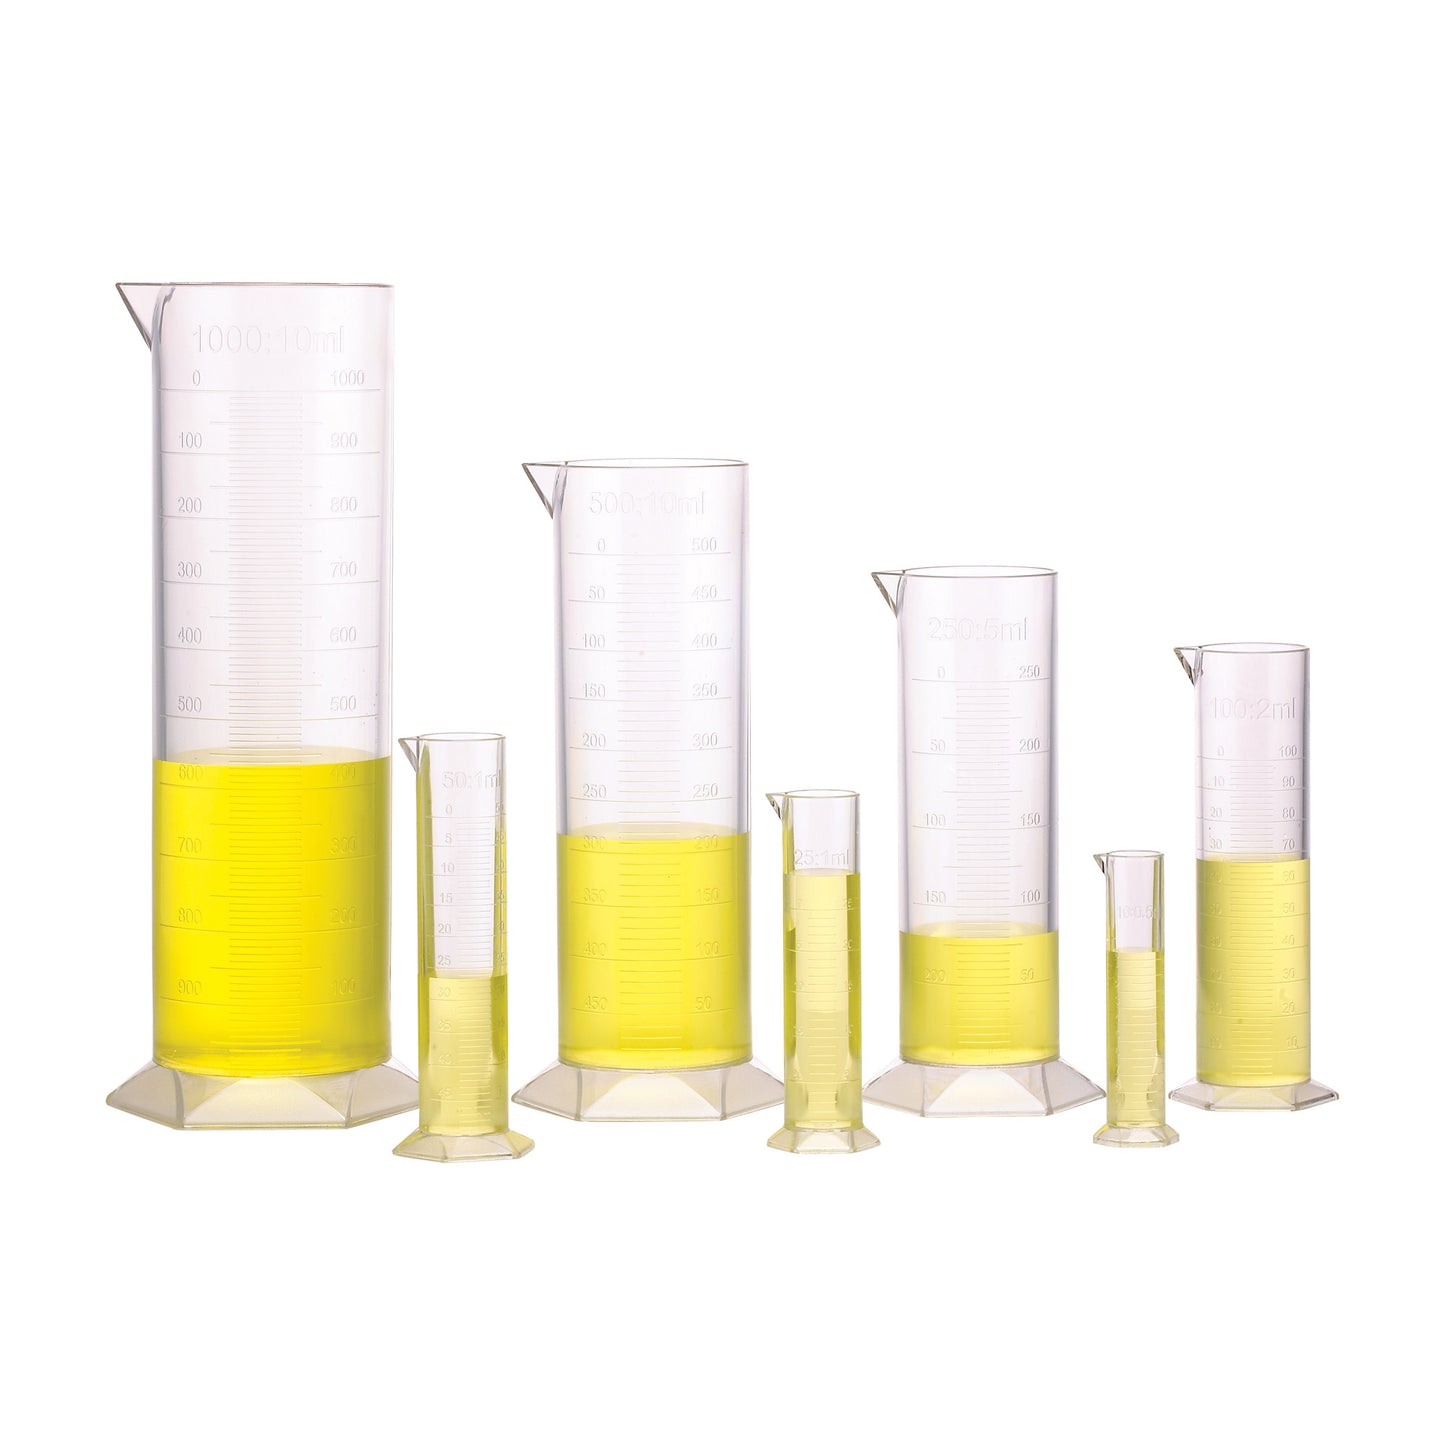 
                  
                    Graduated Cylinders
                  
                